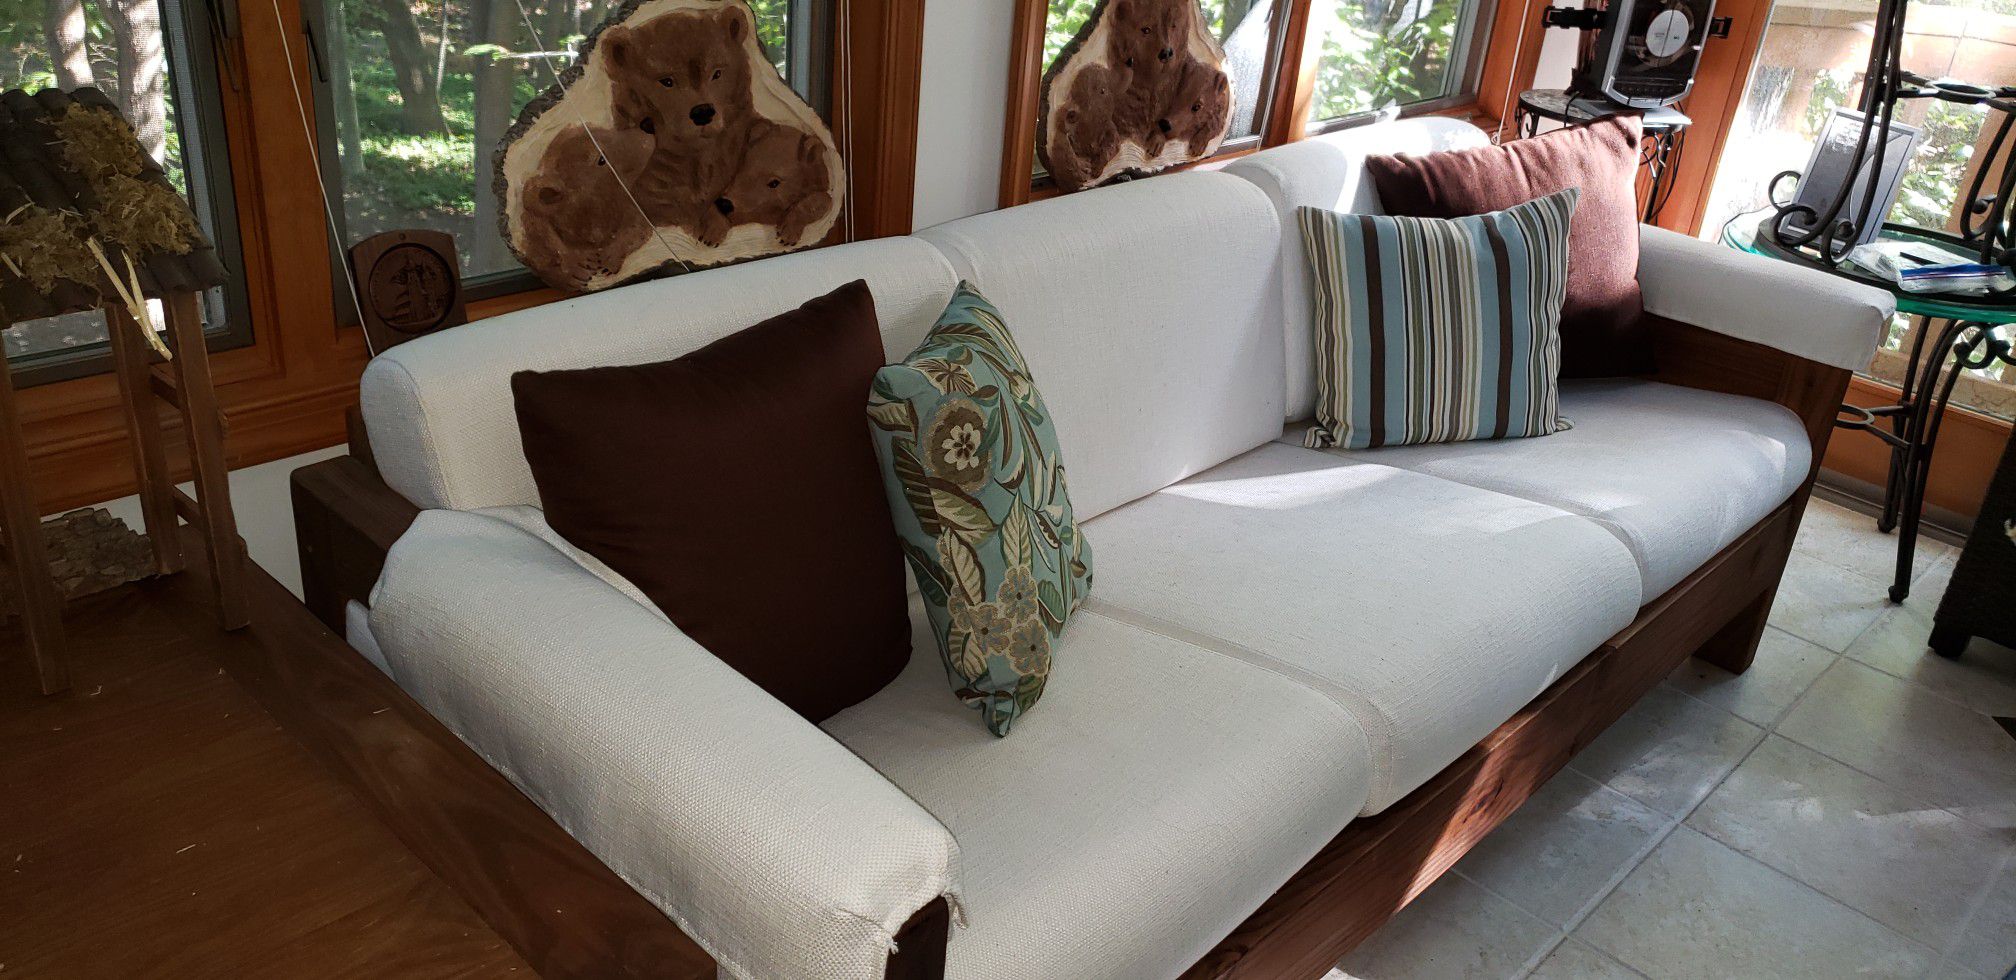 Woodcraft couch with newly upholstered cushions